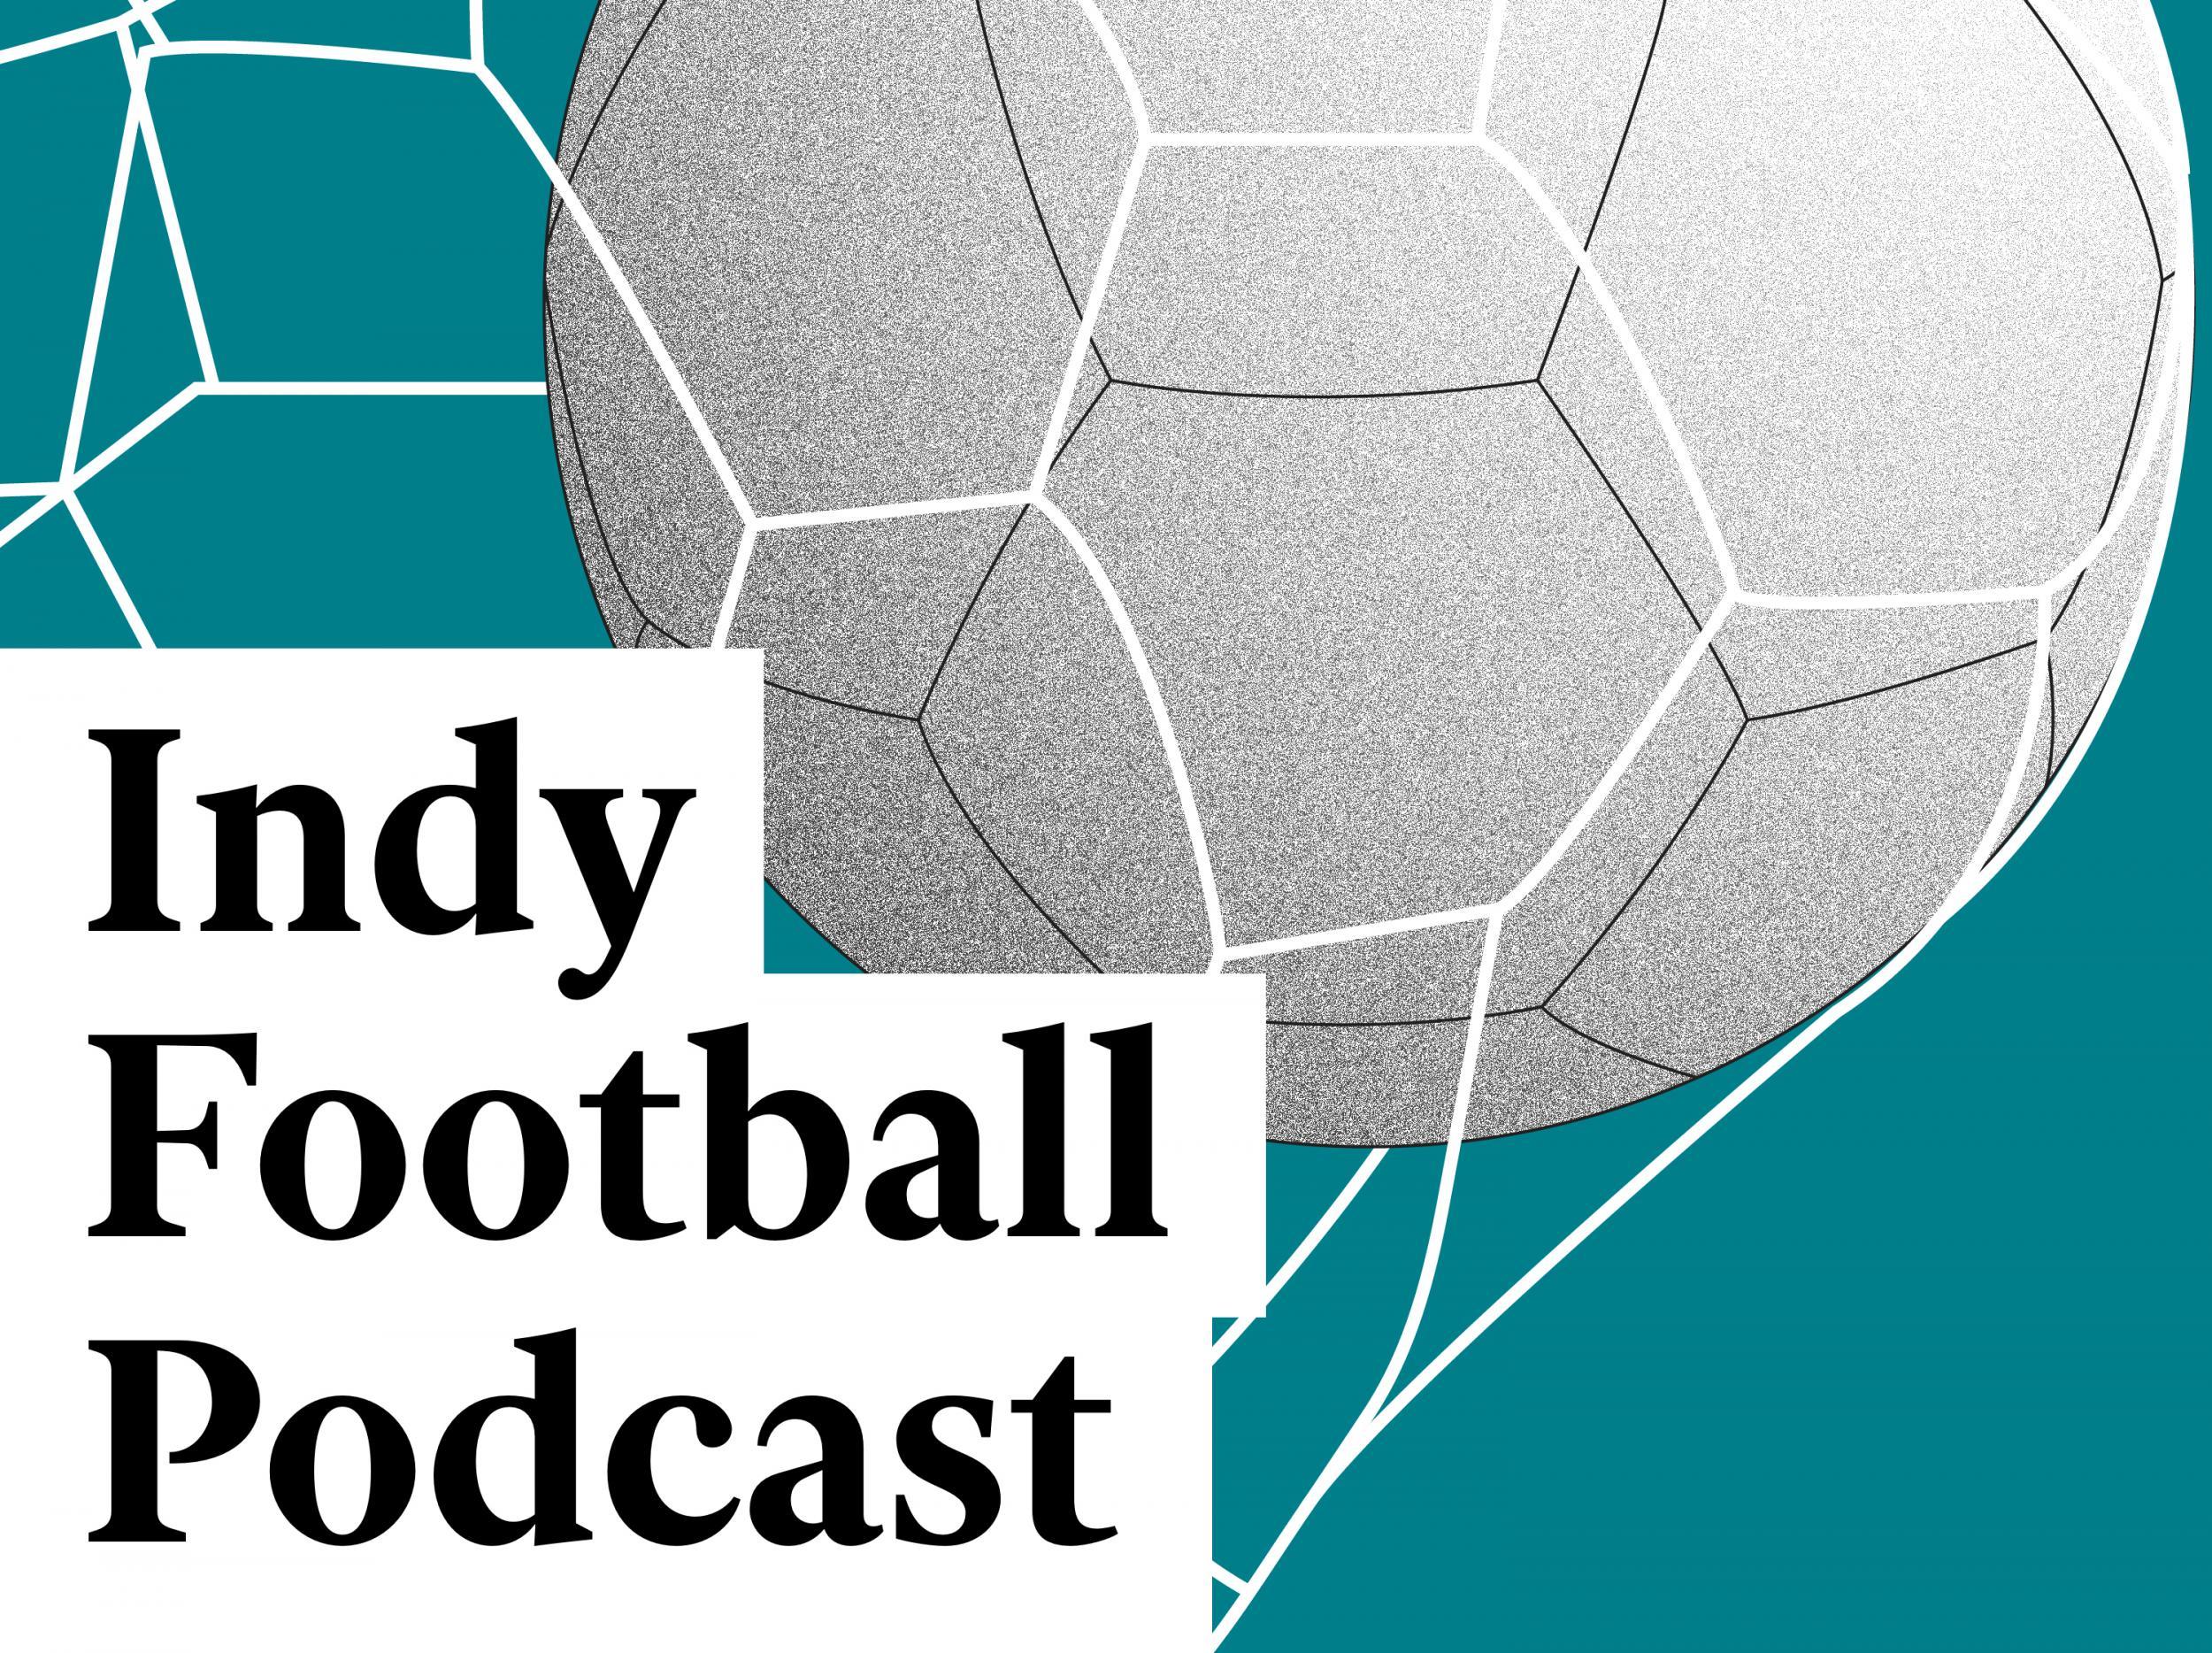 Listen to the latest Indy Football Podcast episode